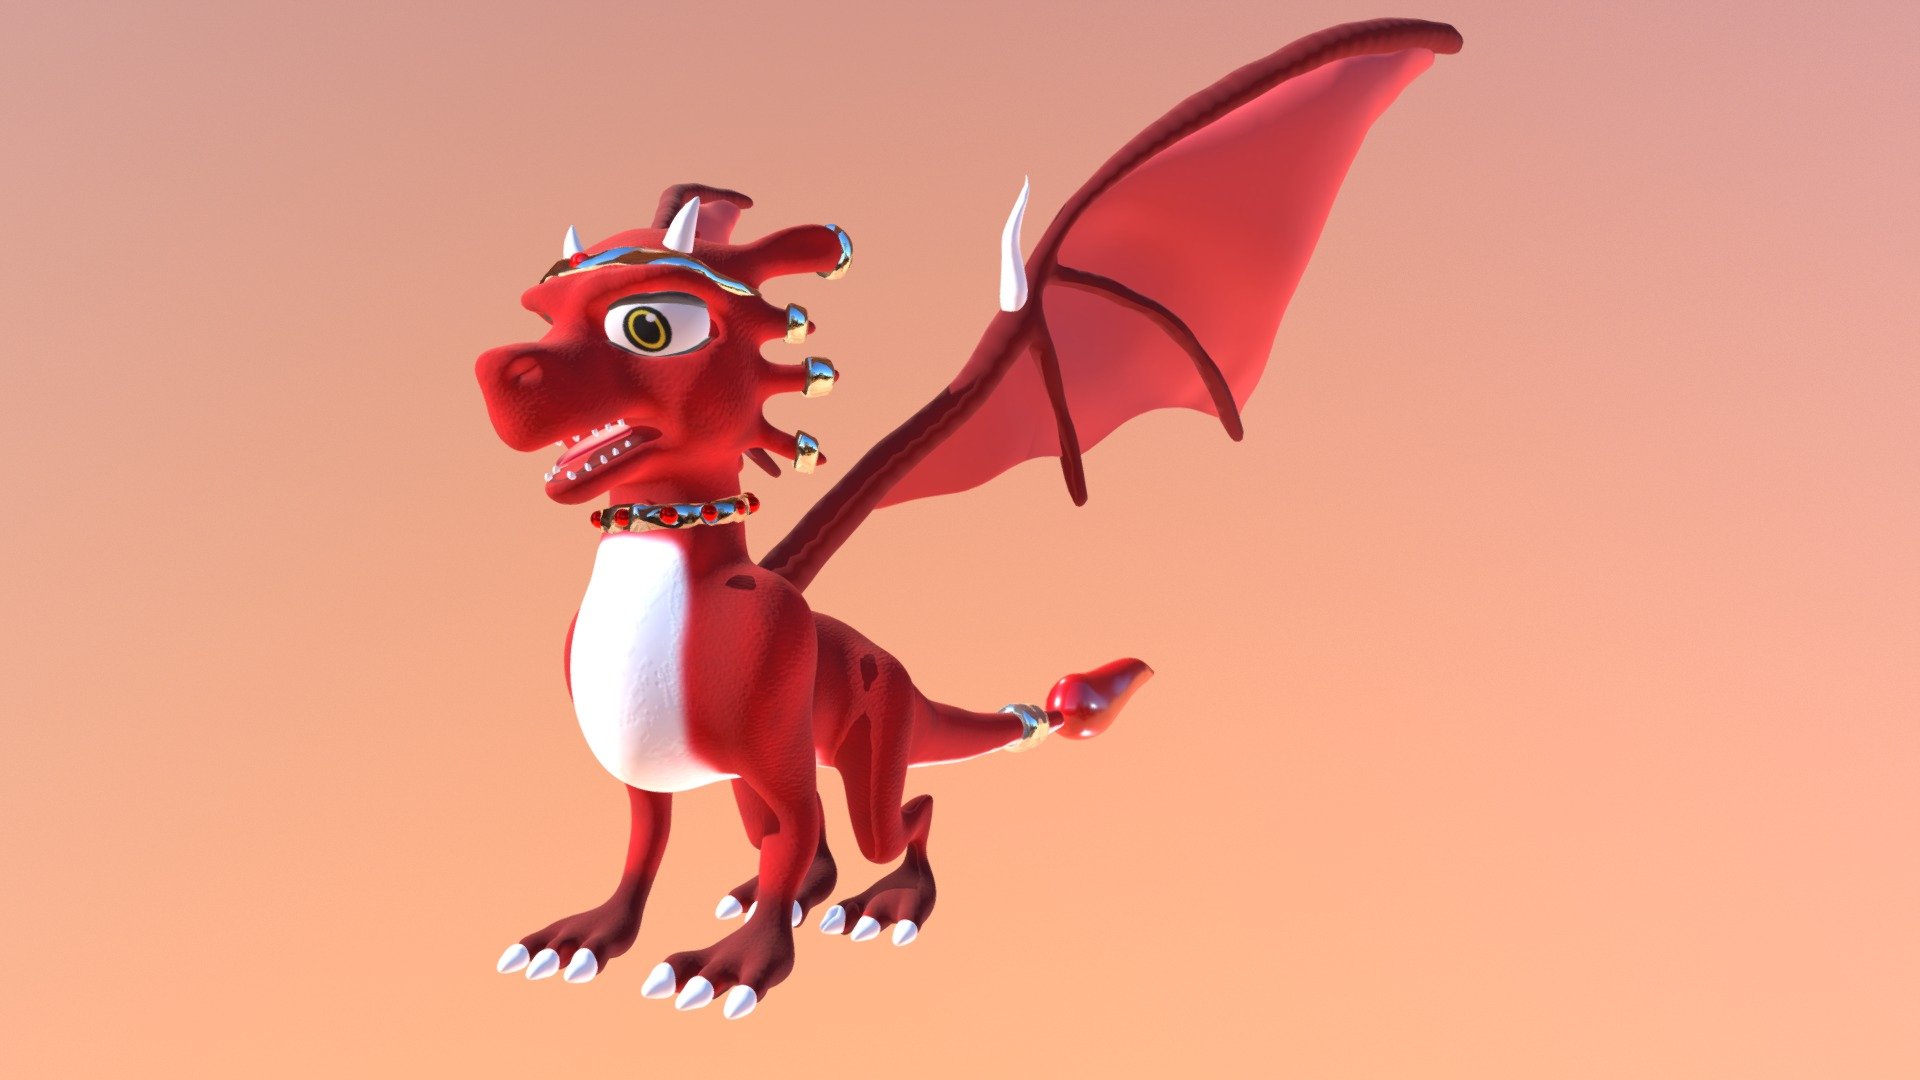 Name: Alisth 
Character Dragon Cartoon 3D Model CGI

Ispirate The Legend of Spyro Character Cynder - Dragon Cartoon - Download Free 3D model by xeratdragons (@dragonights91) 3d model